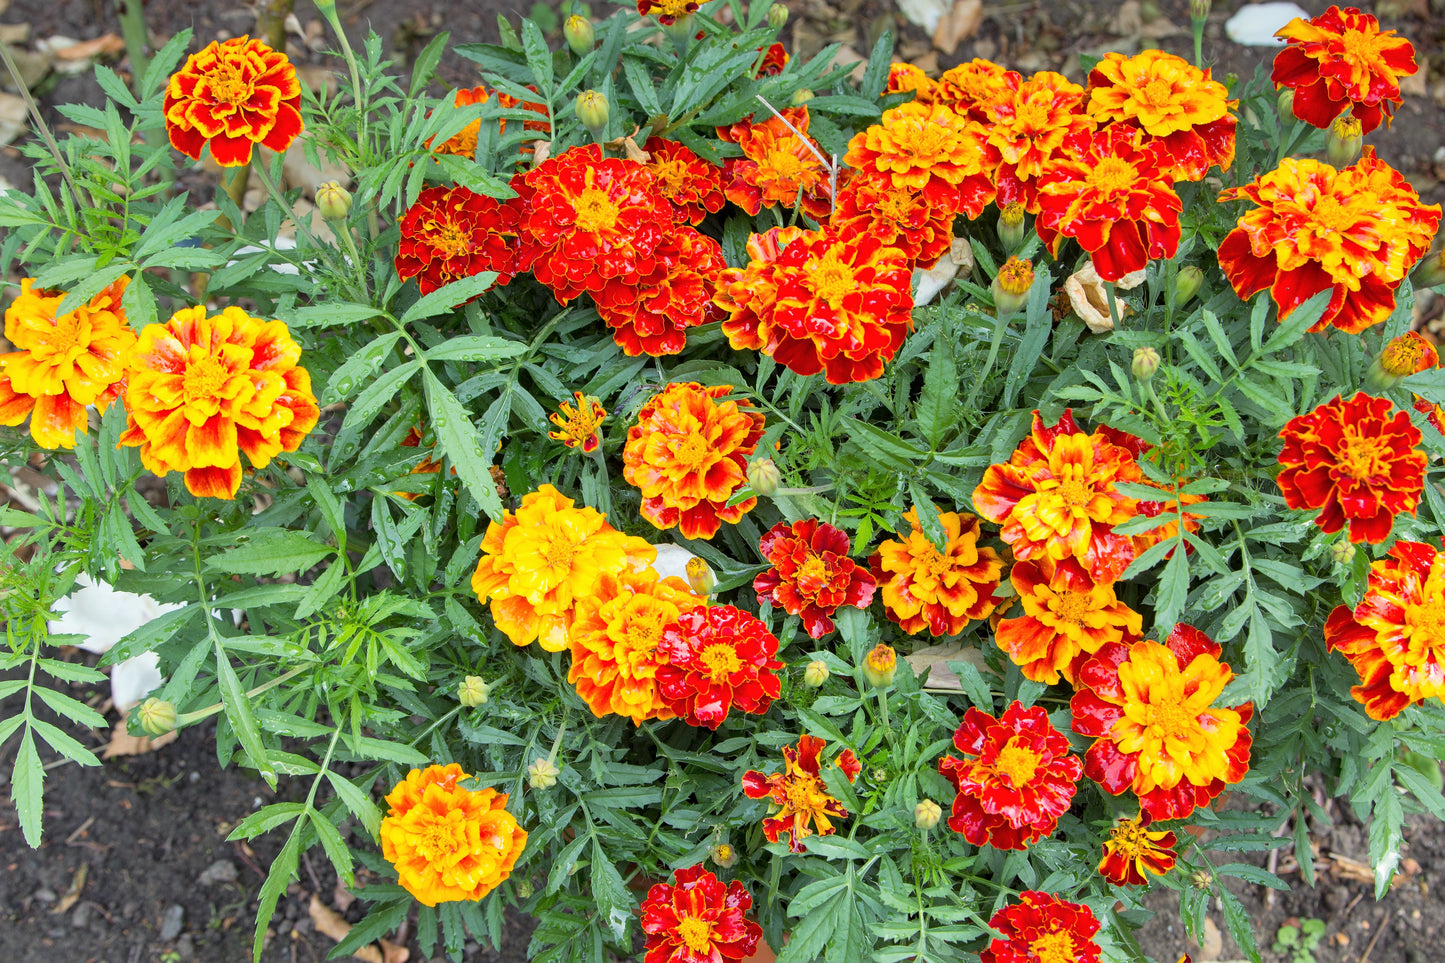 400 FRENCH MARIGOLD SPARKY Mixed Colors Tagetes Patula Orange Yellow Red Flower Seeds